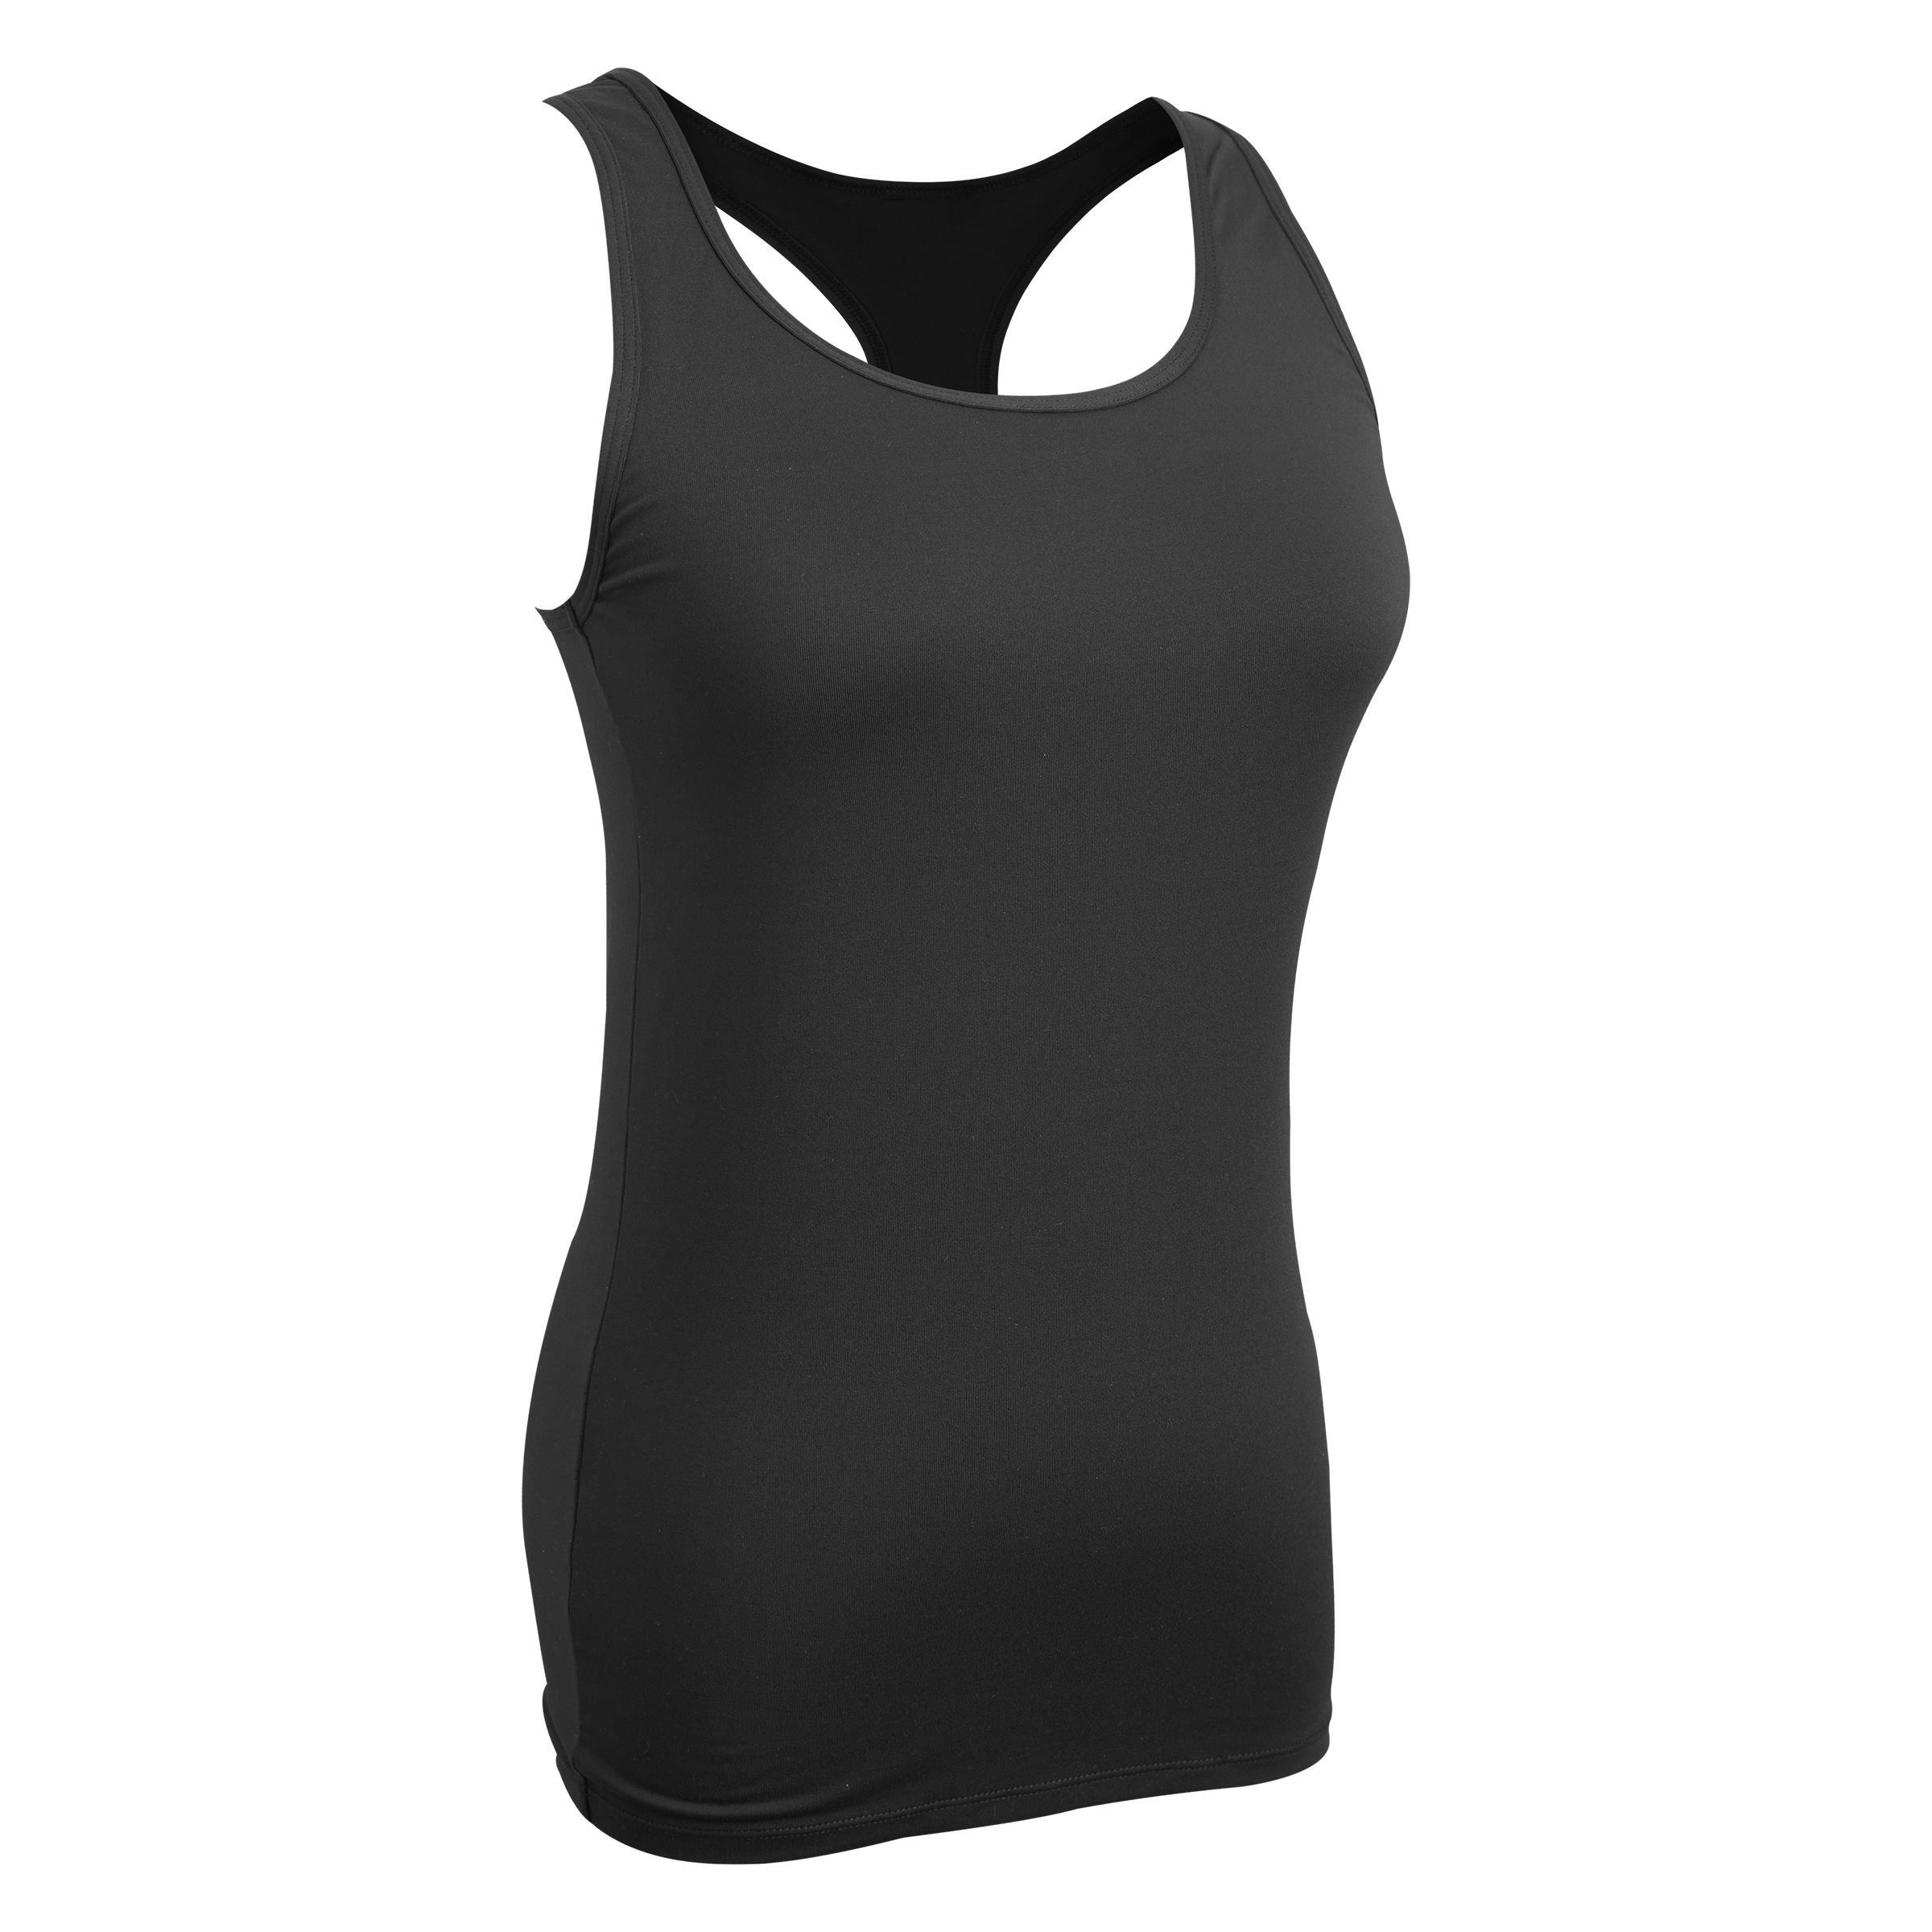 Muscle Back Crew Neck Fitness Cardio Tank Top My Top - Black 6/6